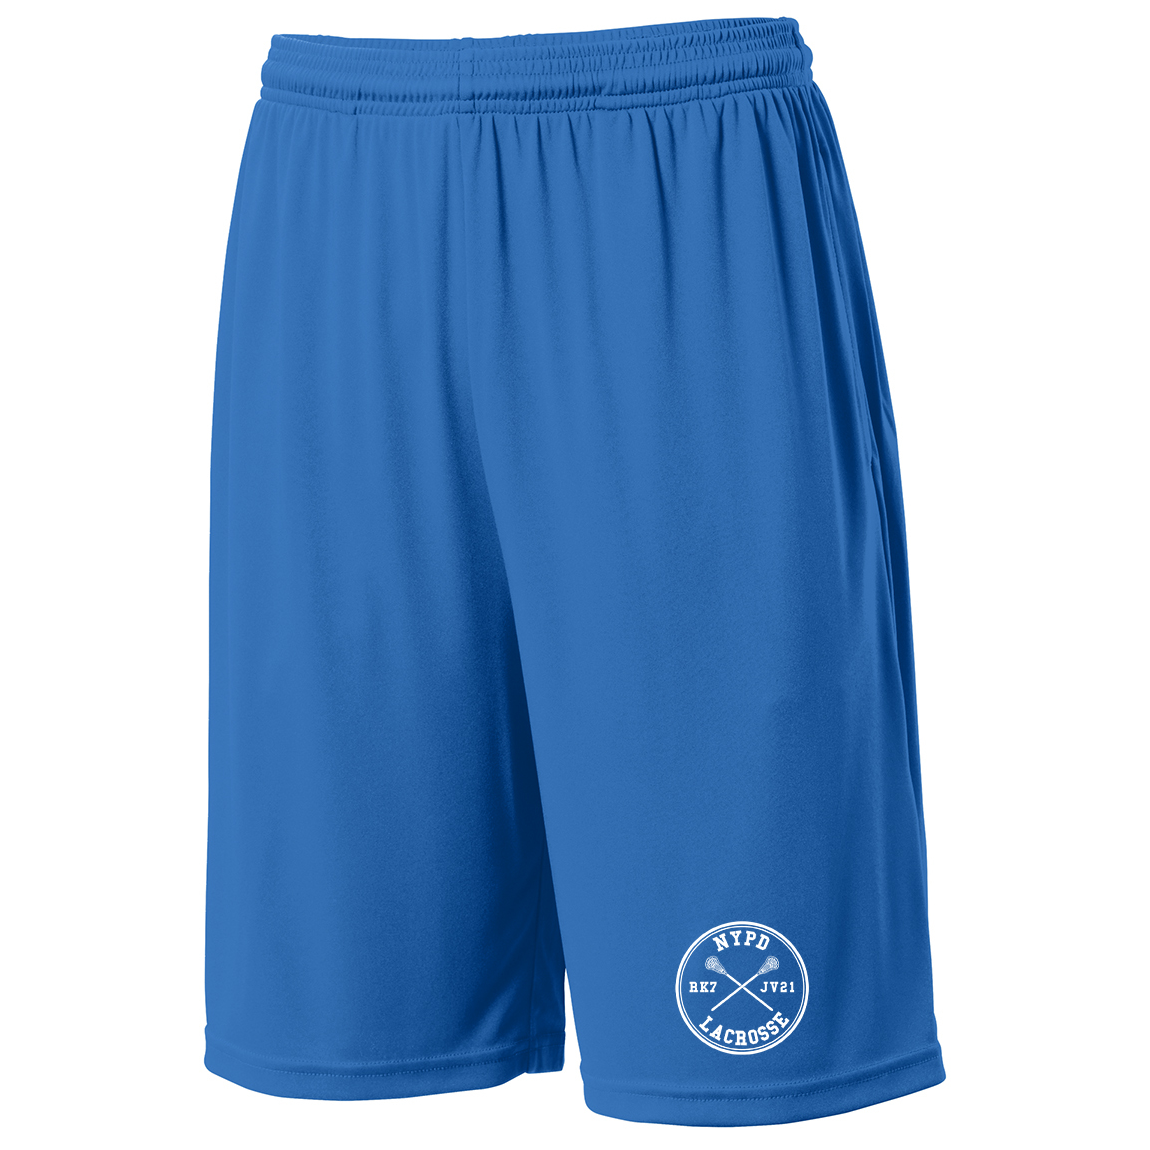 NYPD Lacrosse Shorts